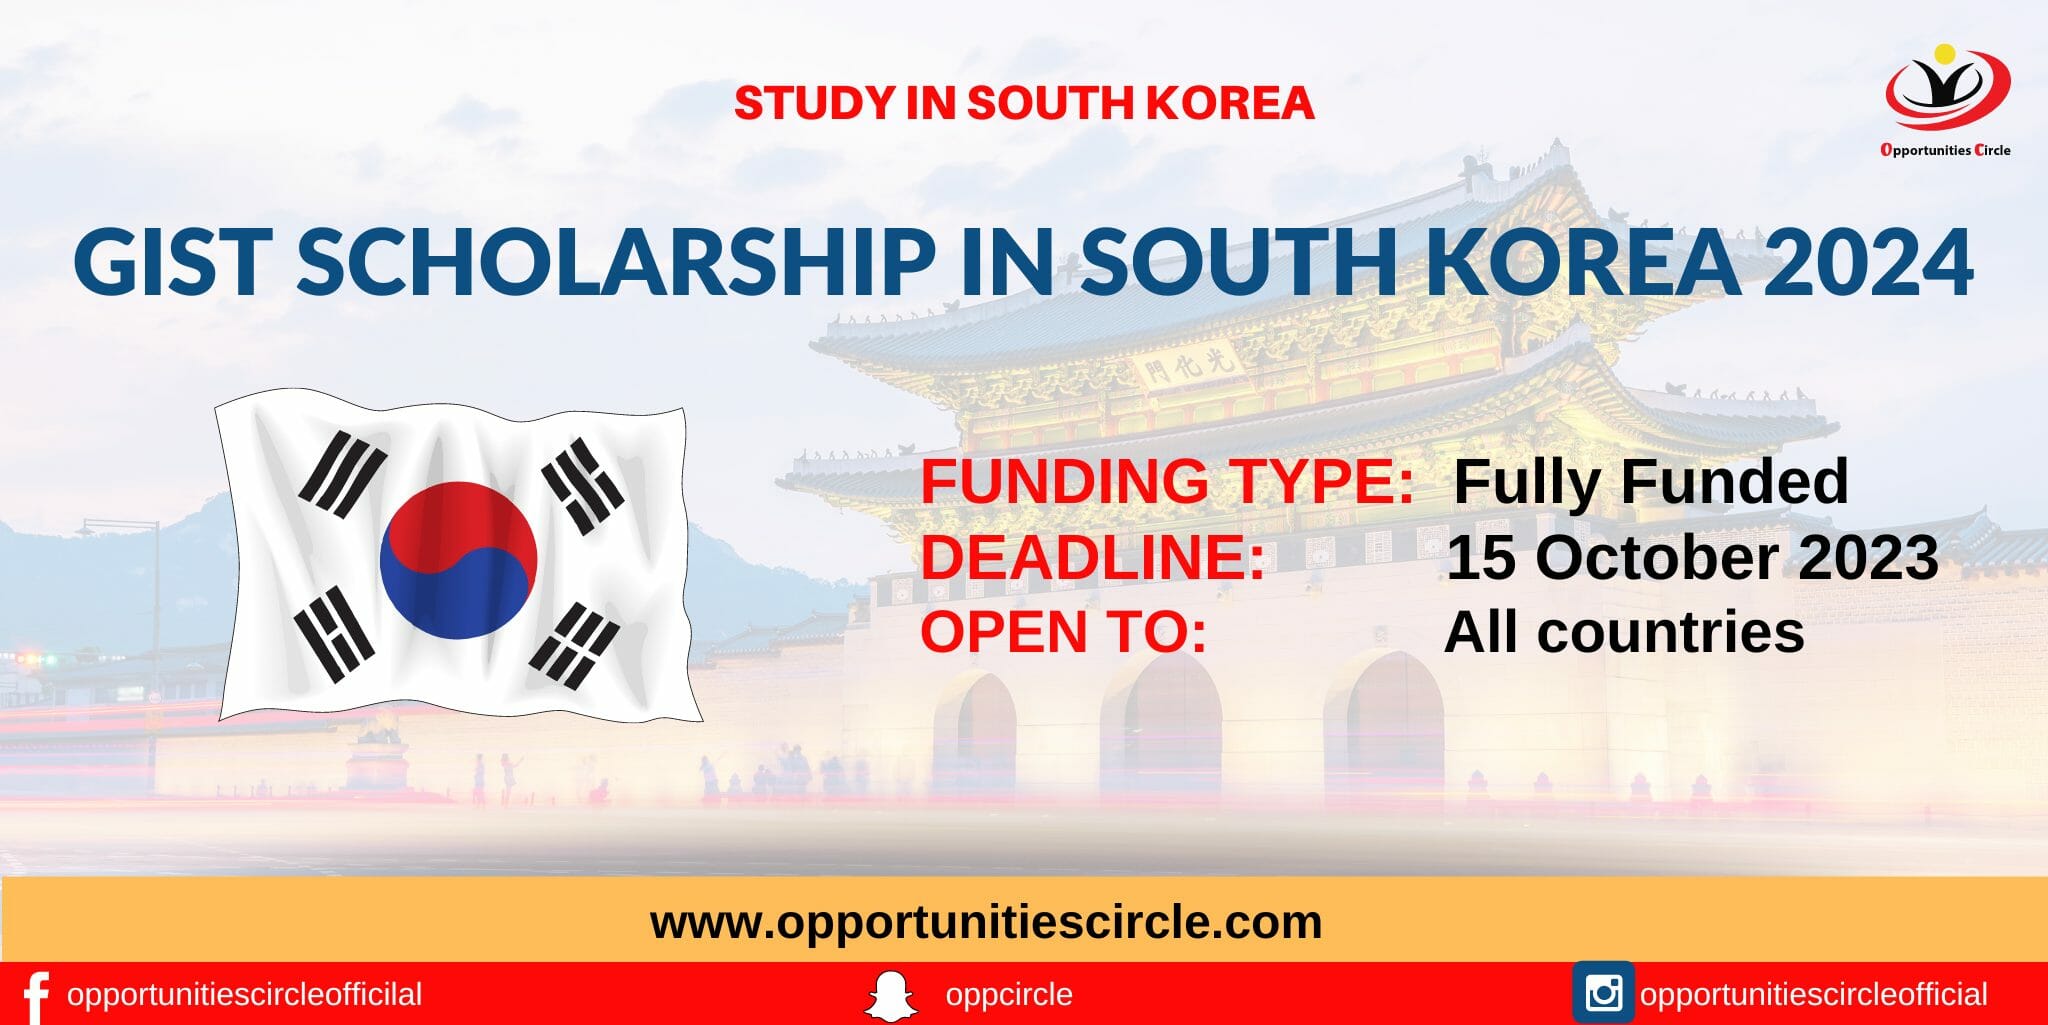 GIST Scholarship in South Korea 2024 Fully Funded Study in Korea Opportunities Circle